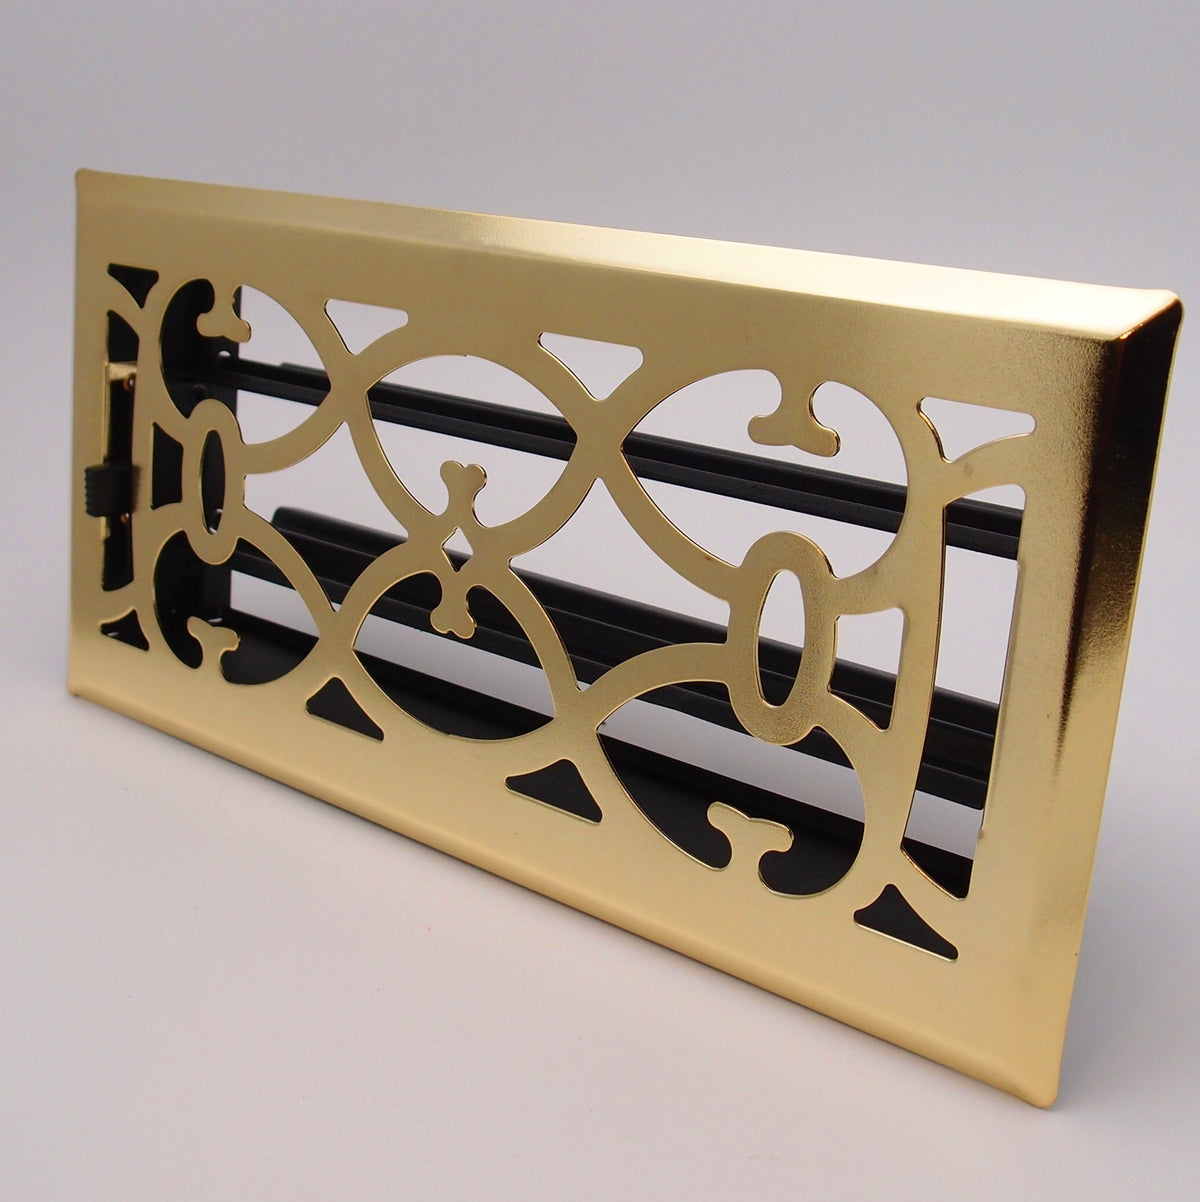 4&quot; X 12&quot; Brass Victorian Floor Register Grille - Modern Contempo Decorative Grate - HVAC Vent Duct Cover - Brass Plated